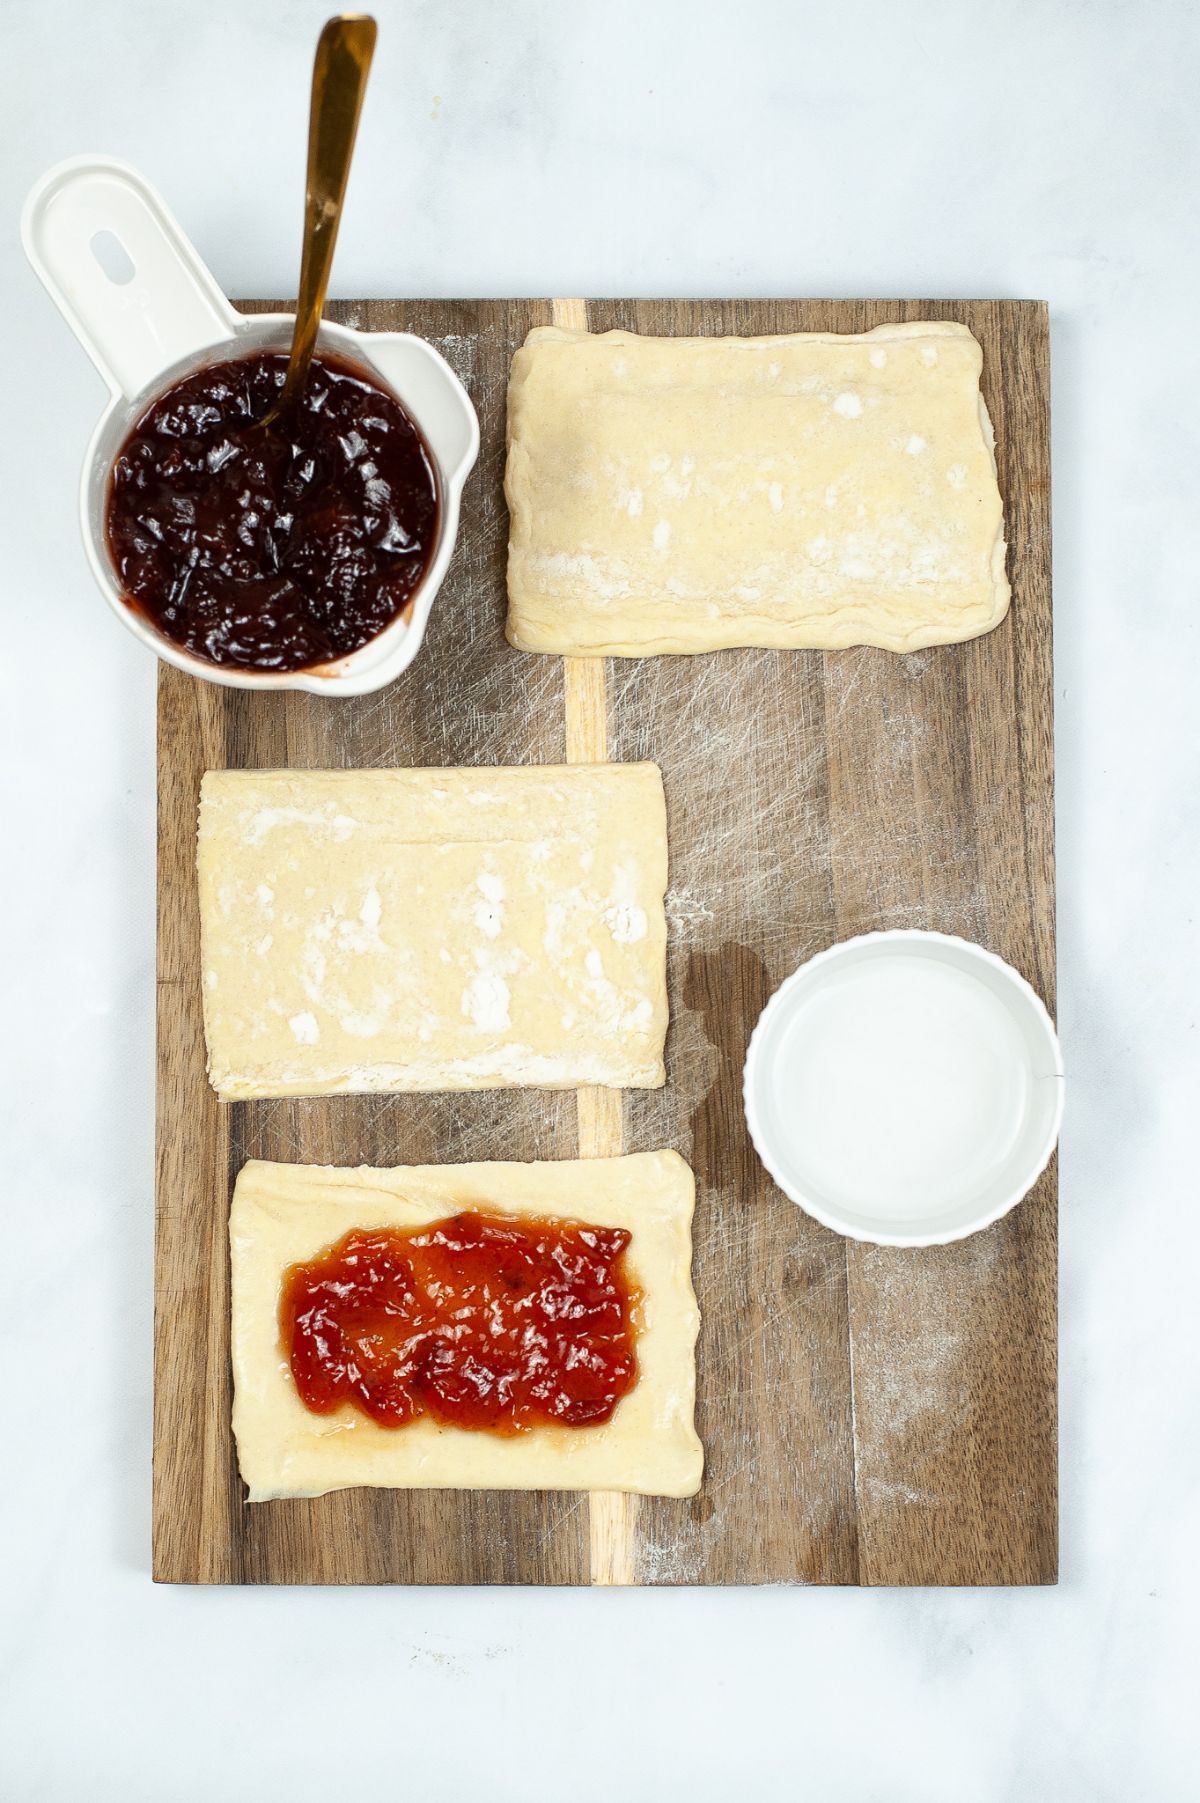 An image of Air Fryer Toaster Strudel being assembled showing a sheet of puff pastry with a jam on top of it and other ingredients around it.